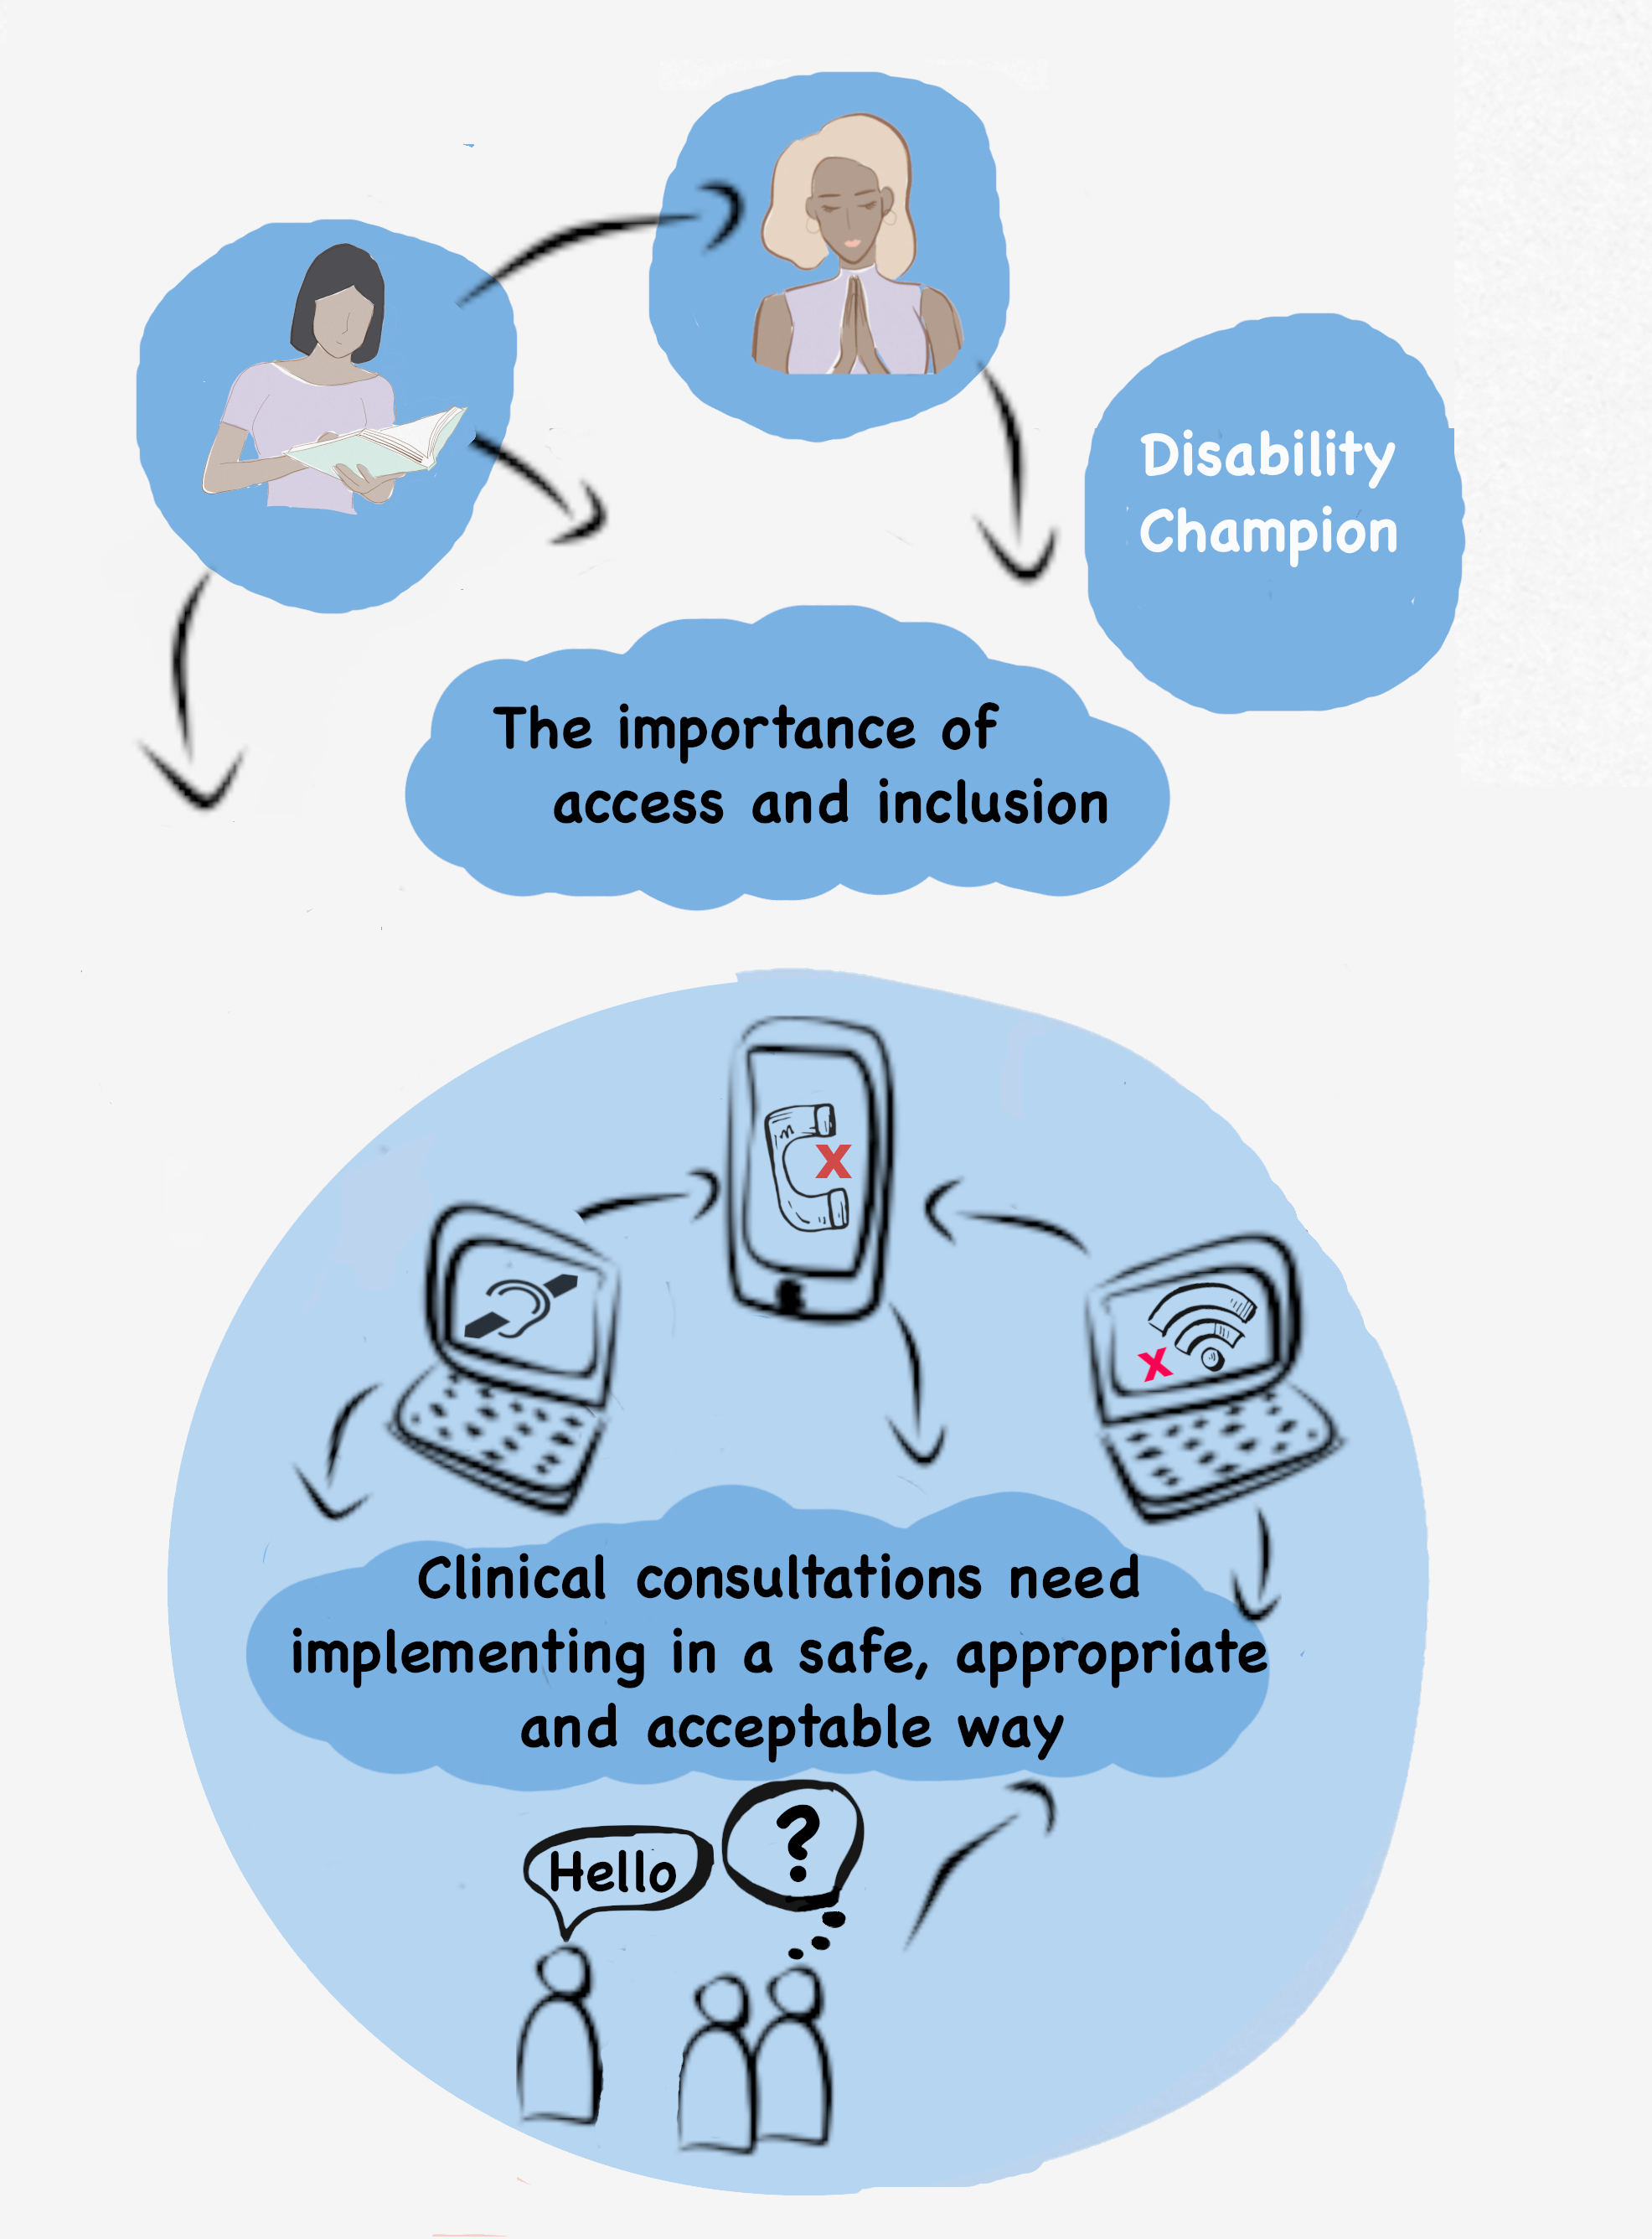 Illustration of inclusion showing the importance of inclusion. Clinical consultations need to be implemented in a safe, appropriate and acceptable way.